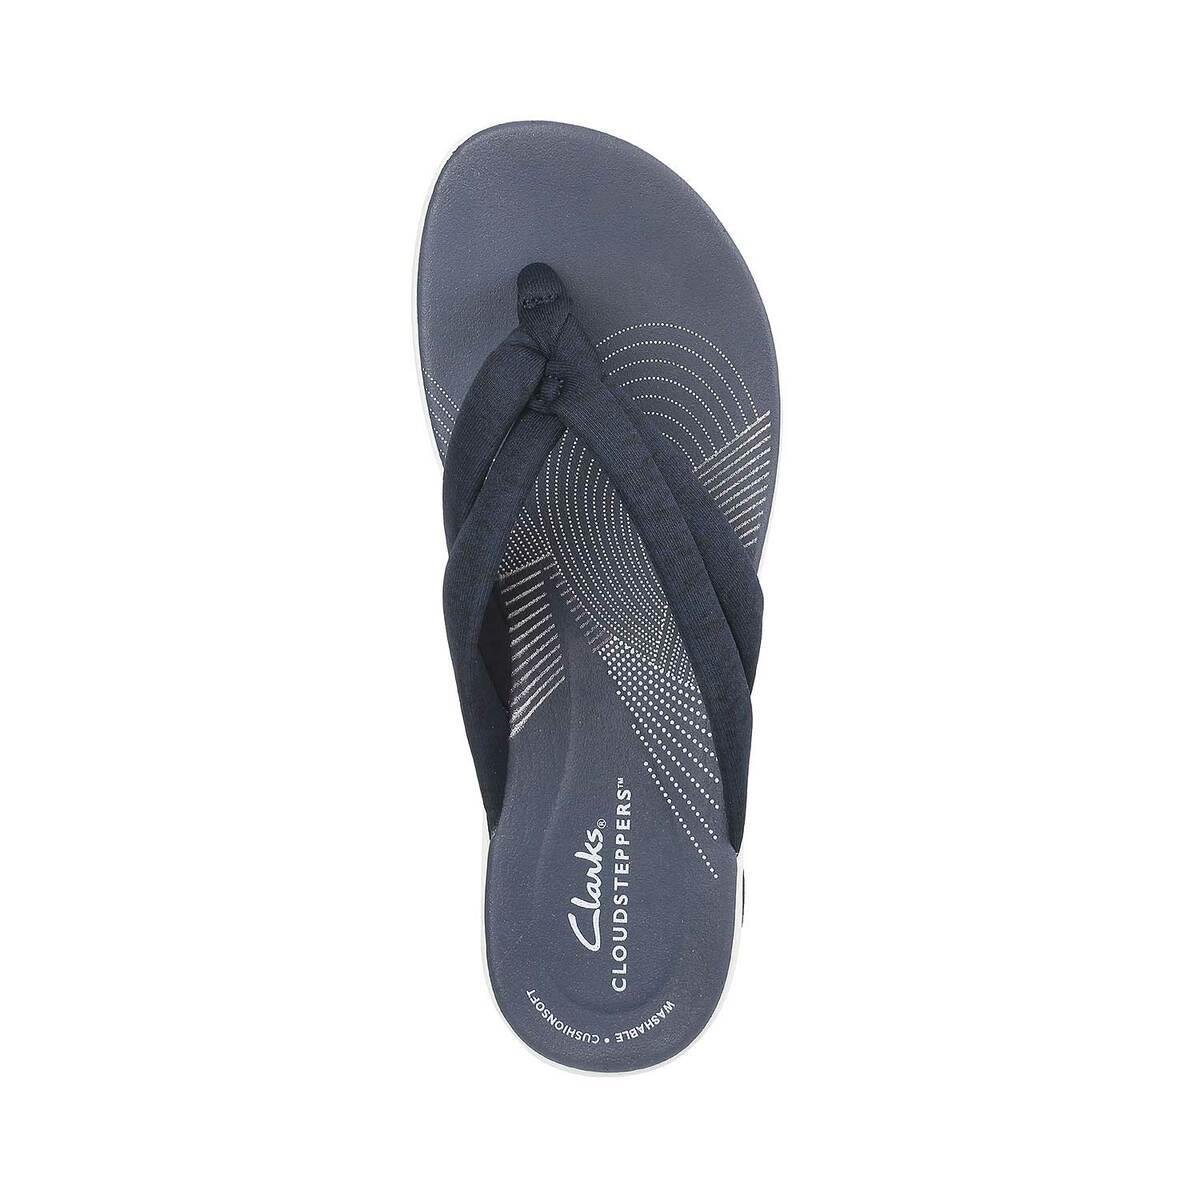 Casual Wear Leather Clarks Sandals For Men, Sandal Type: Casual Sandal,  Multi Color at Rs 1110/pair in Ambur